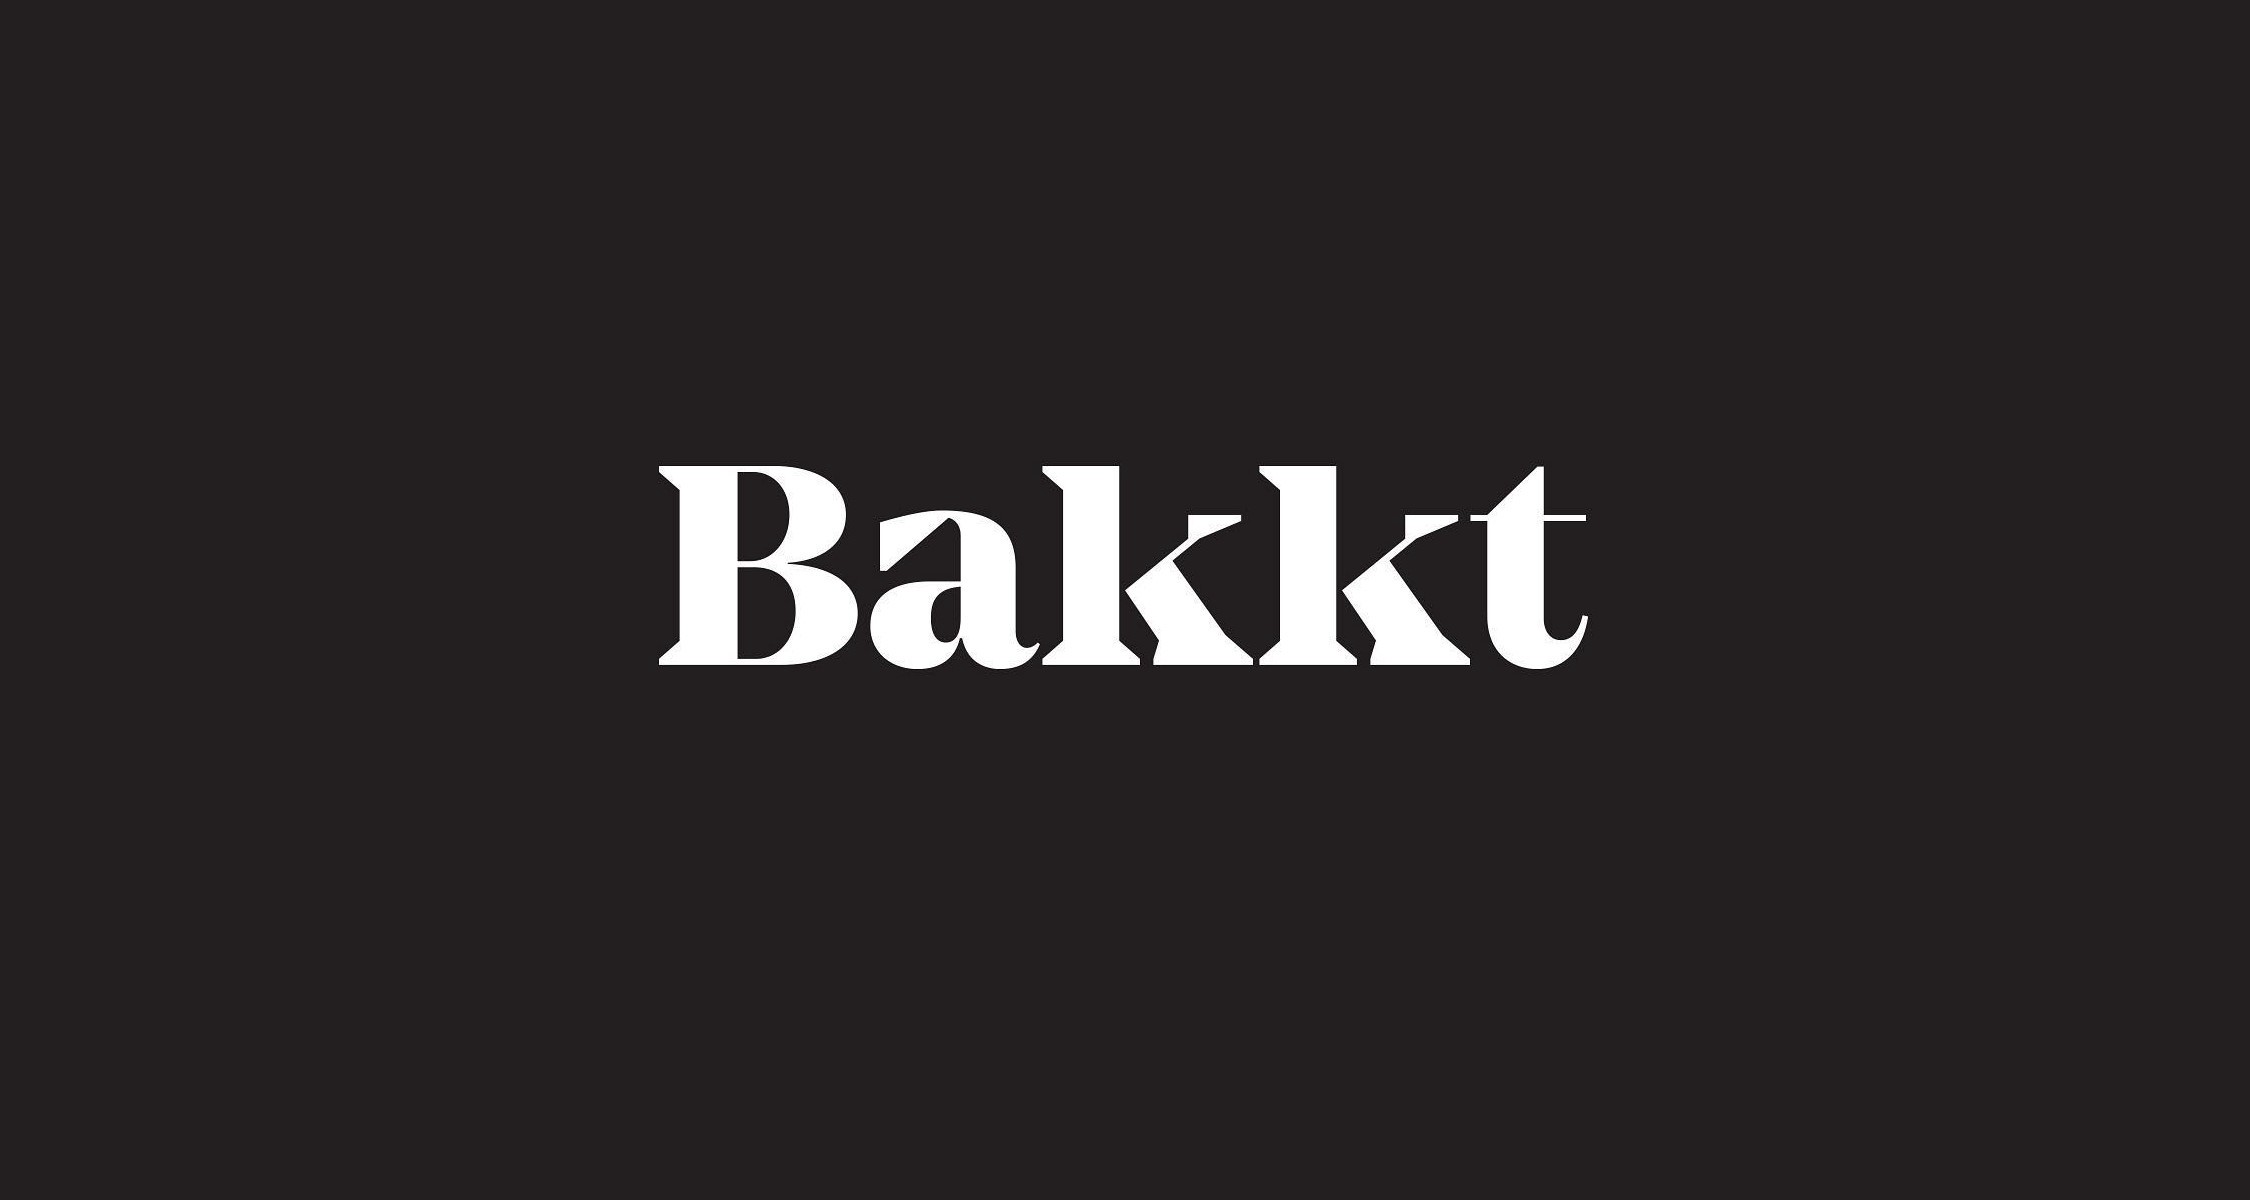 Bakkt Warehouse accepts BTC deposits and withdrawals